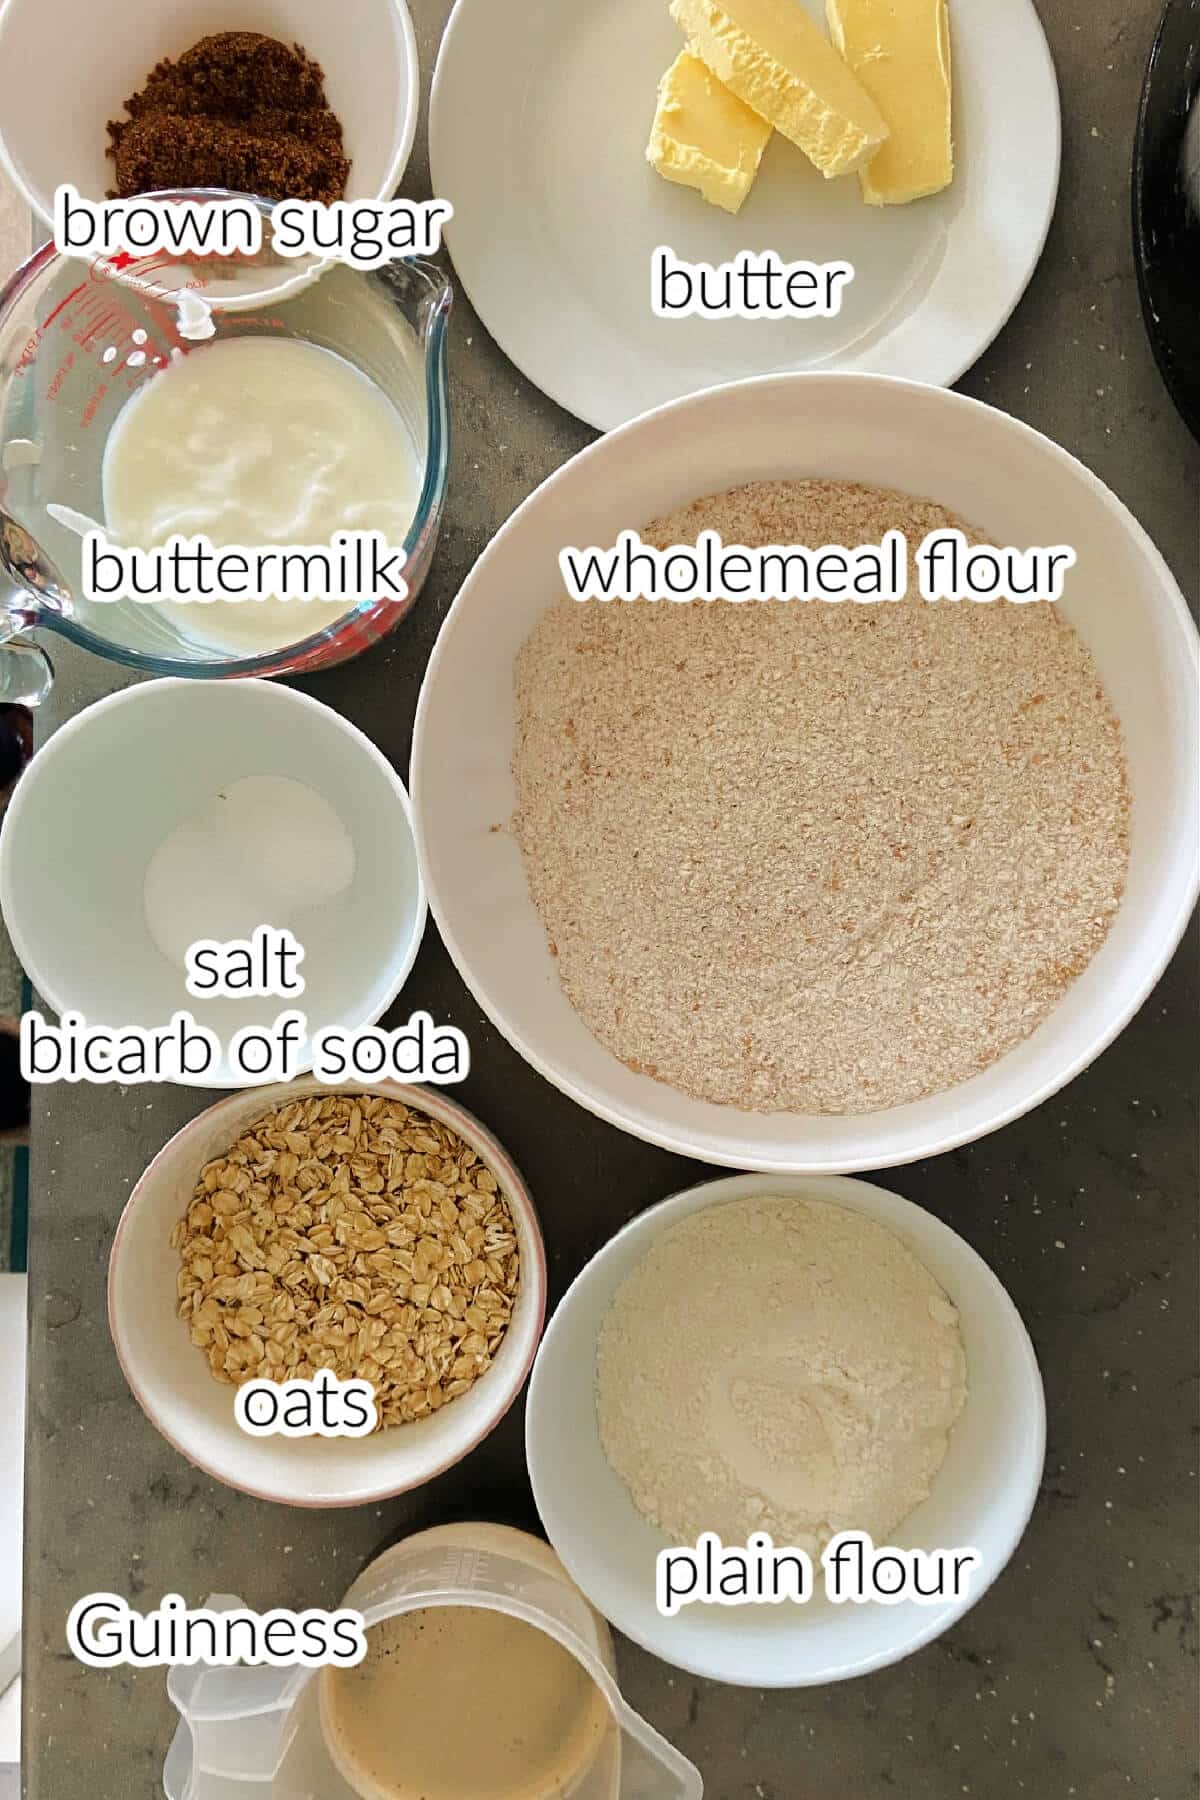 Ingredients used to make Guinness bread.